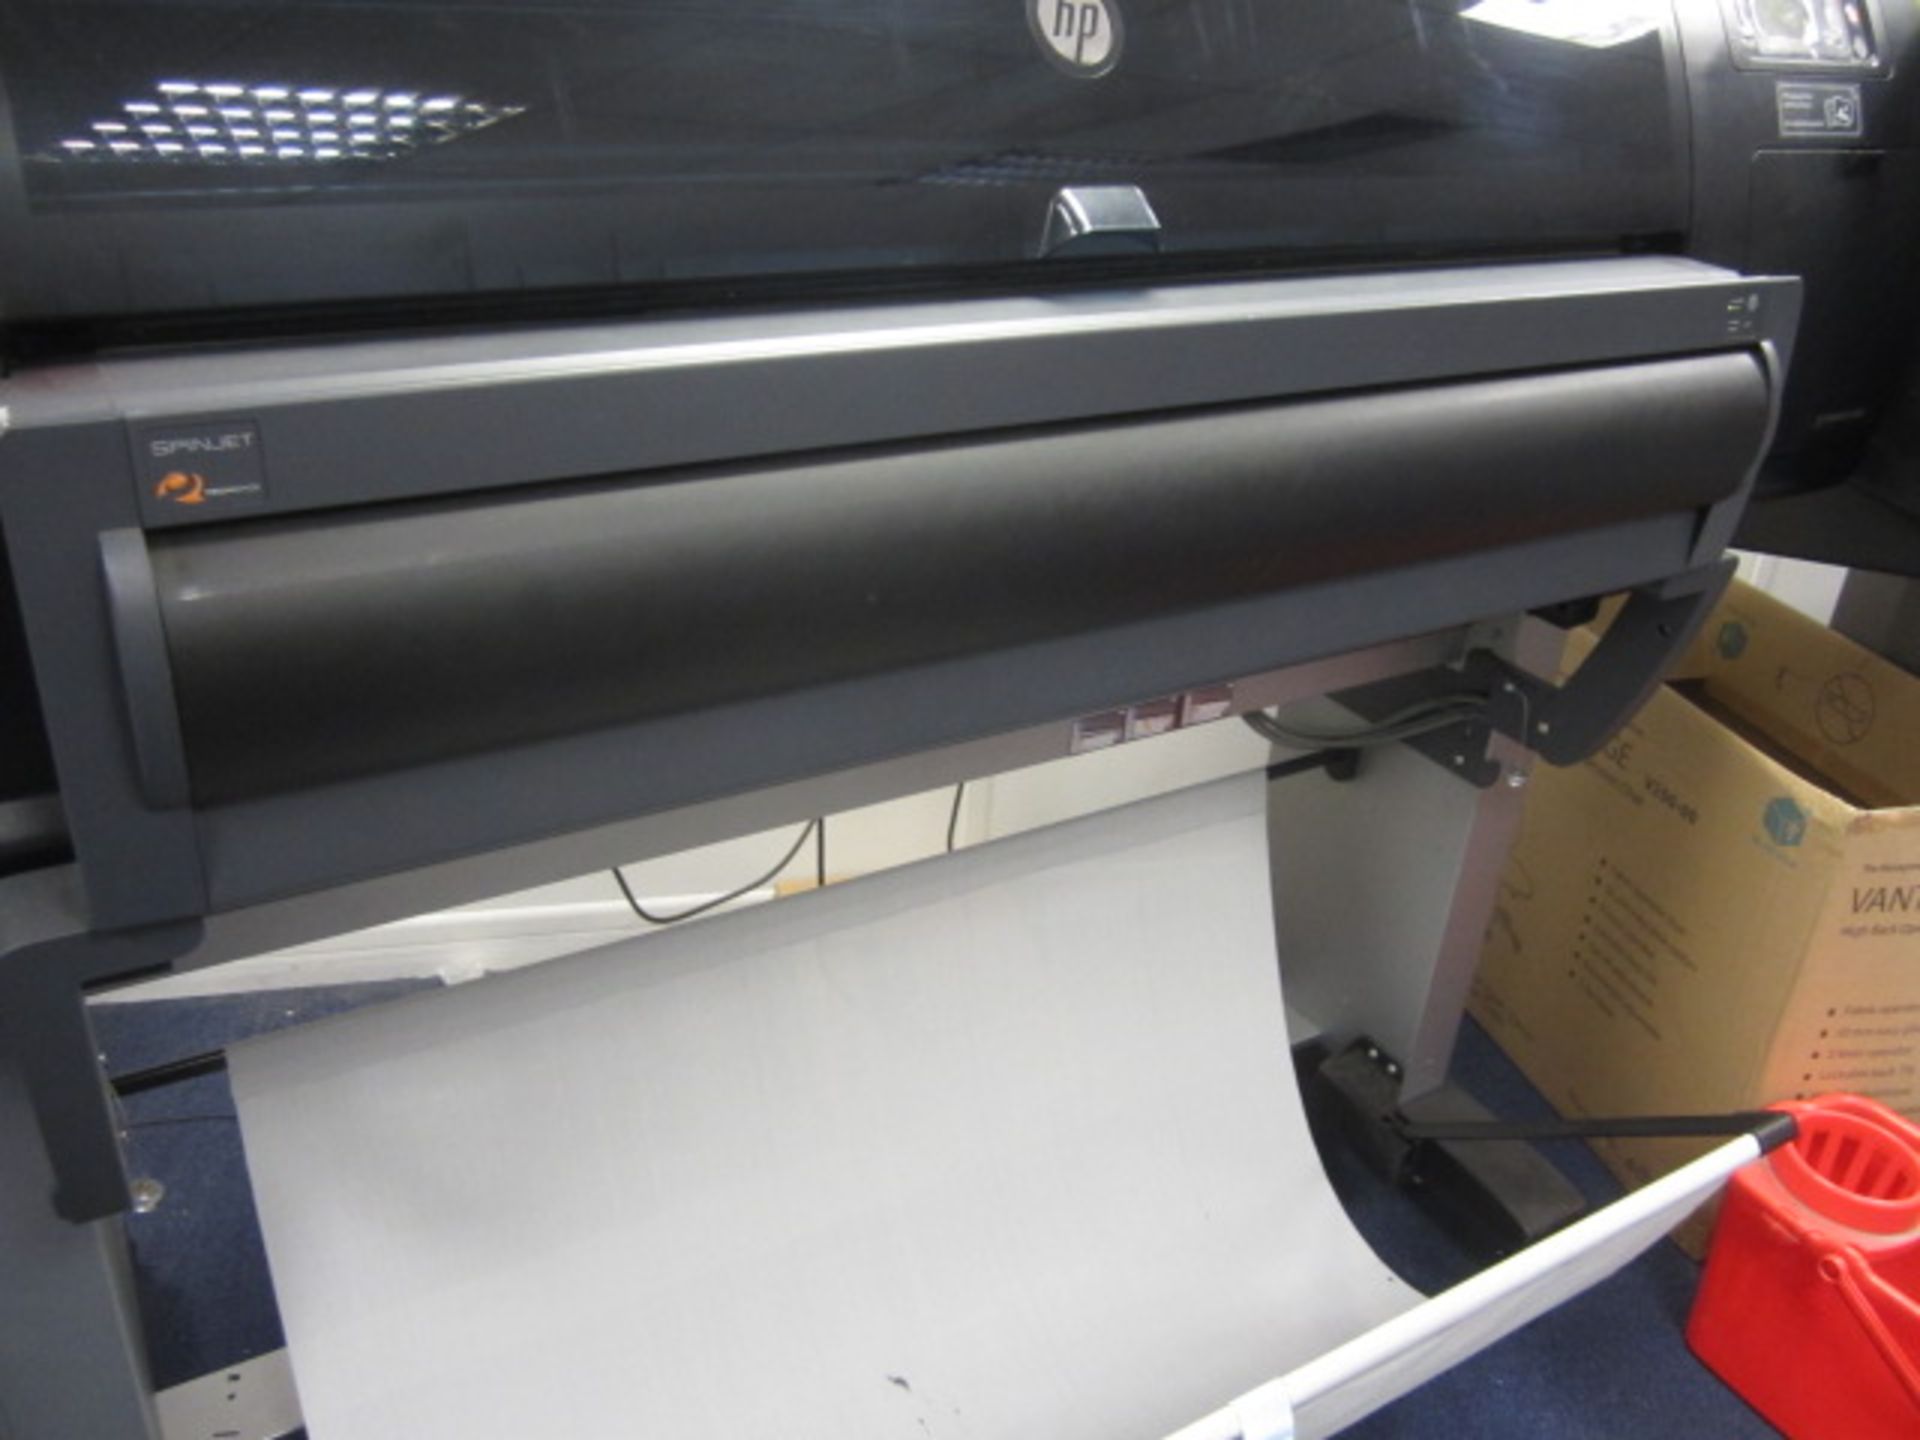 HP Designjet 26200, 8 colour photo printer, serial no. MY838J9018 (2018), with Spinjet Techsidge - Image 6 of 7